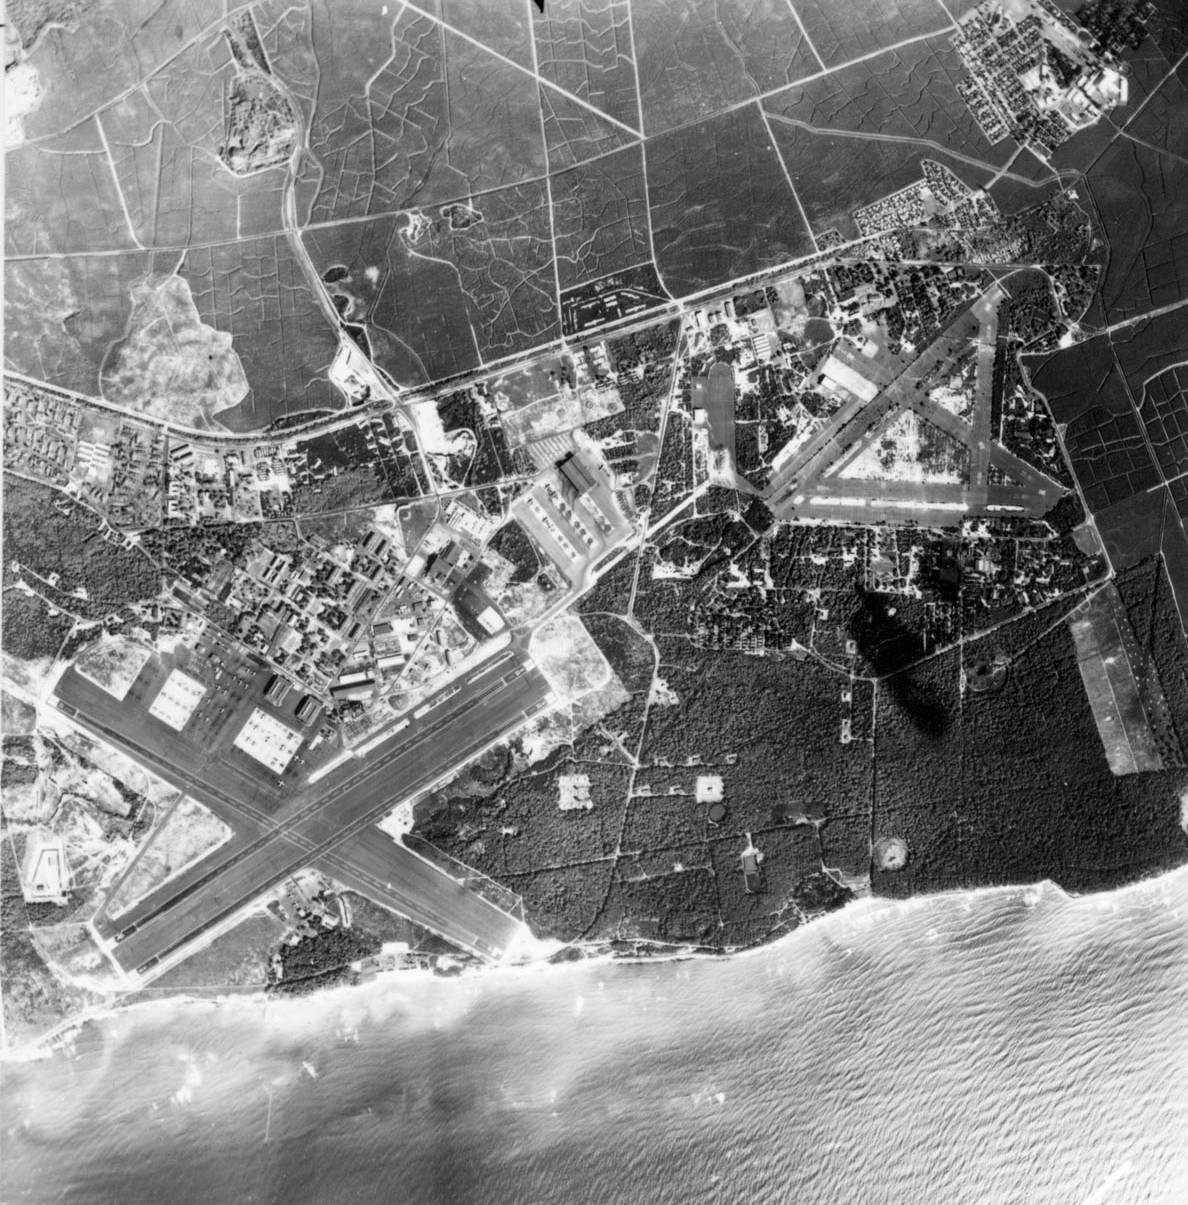 The Ewa Plain on the south coast of Oahu, Hawaii with Barbers Point Naval Air Station on the left and the former Ewa Marine Corps Air Station on the right, Nov 20, 1959